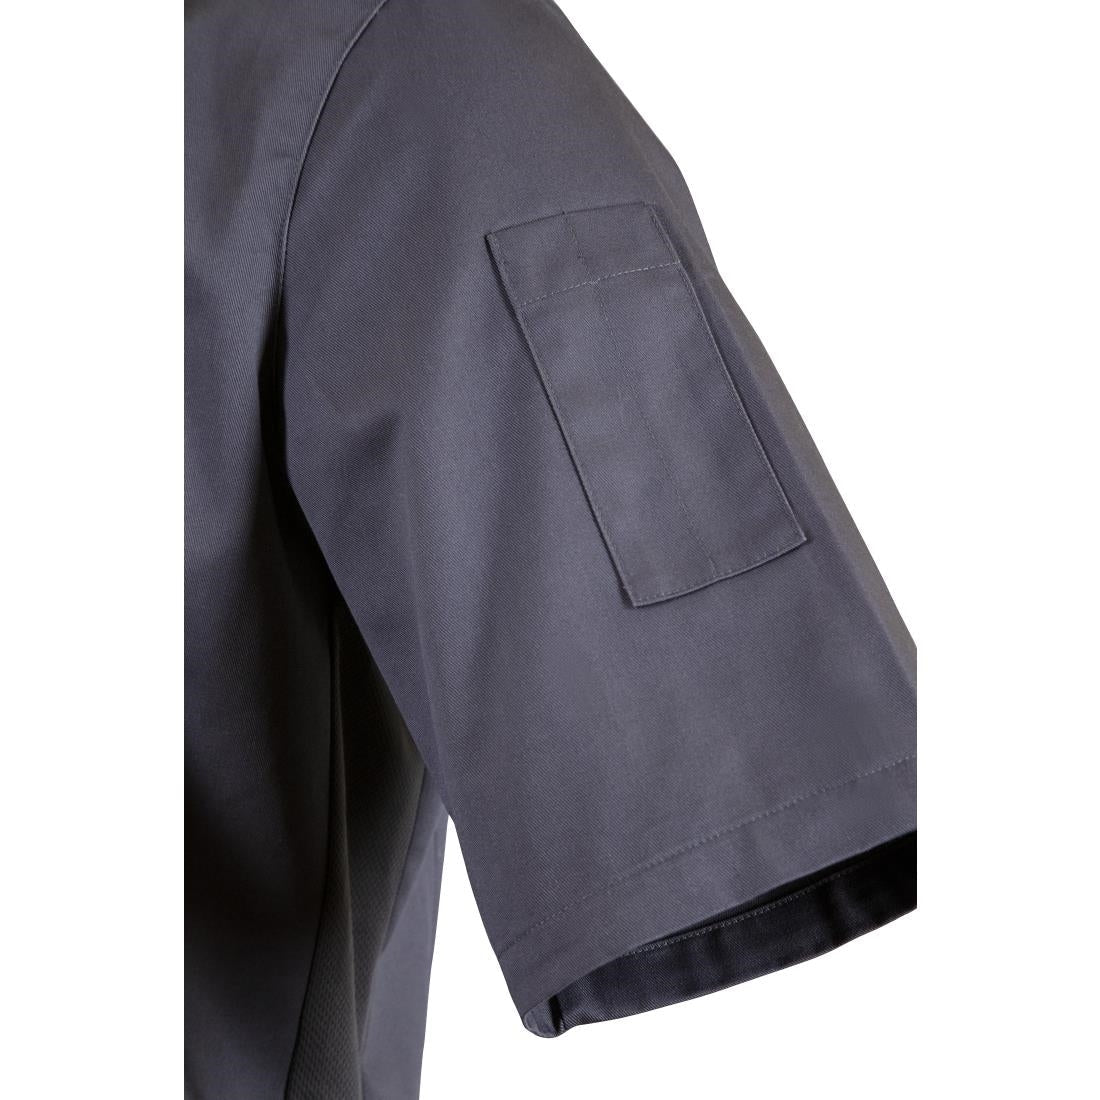 BB712-L Southside Band Collar Chefs Jacket Charcoal Size L JD Catering Equipment Solutions Ltd